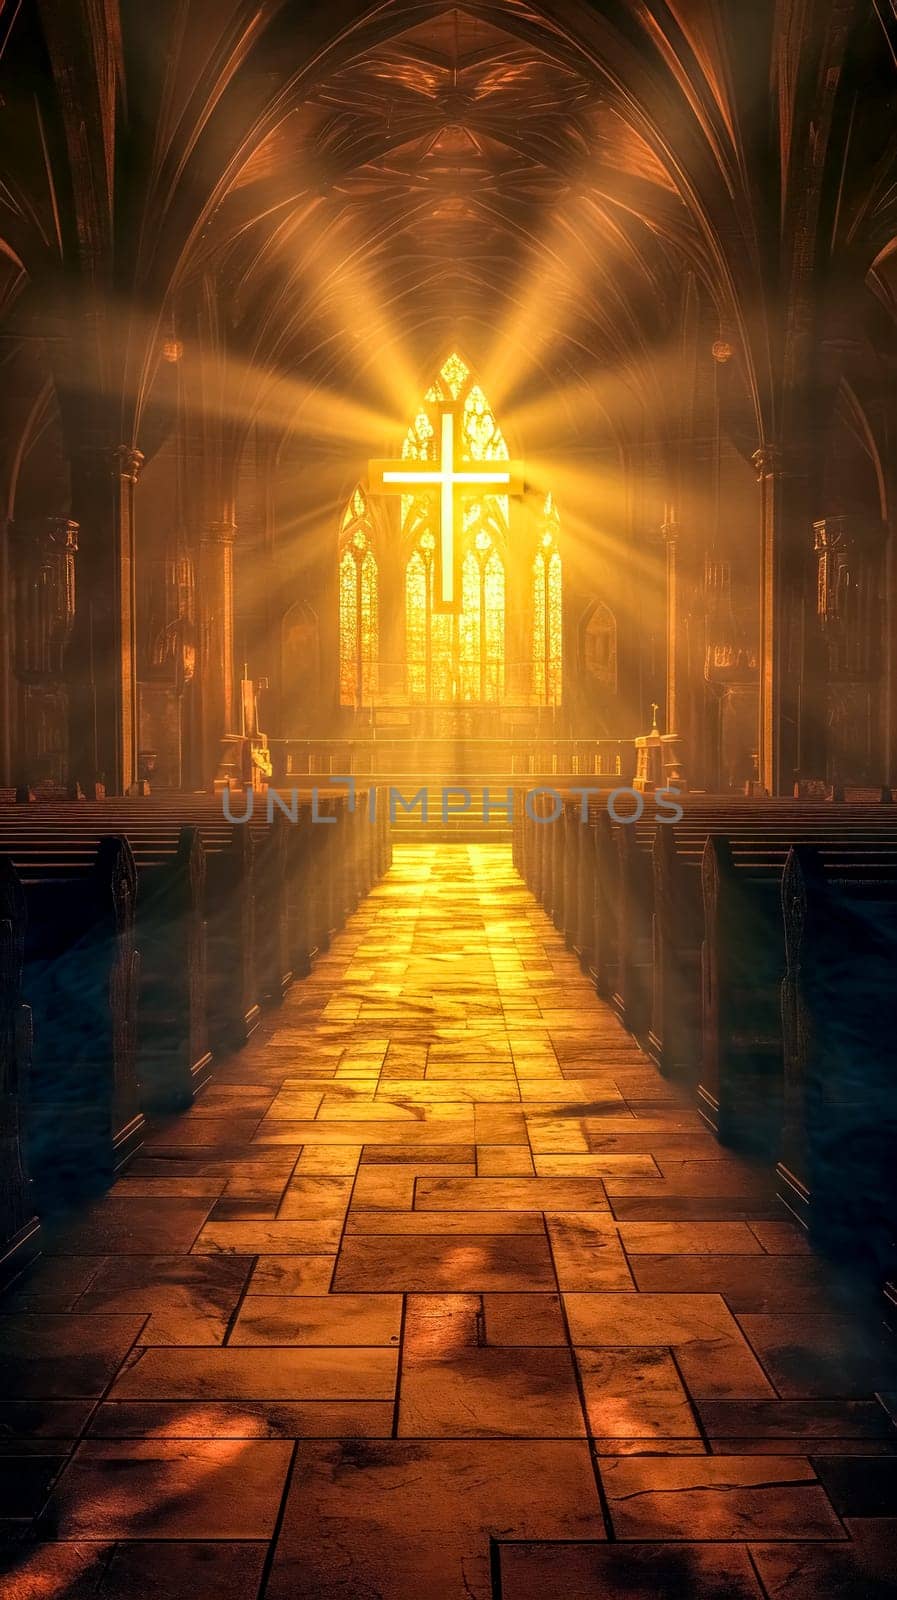 beautifully lit interior of a church with sunlight streaming through stained glass windows onto a cross and the aisle, creating a warm, ethereal atmosphere by Edophoto